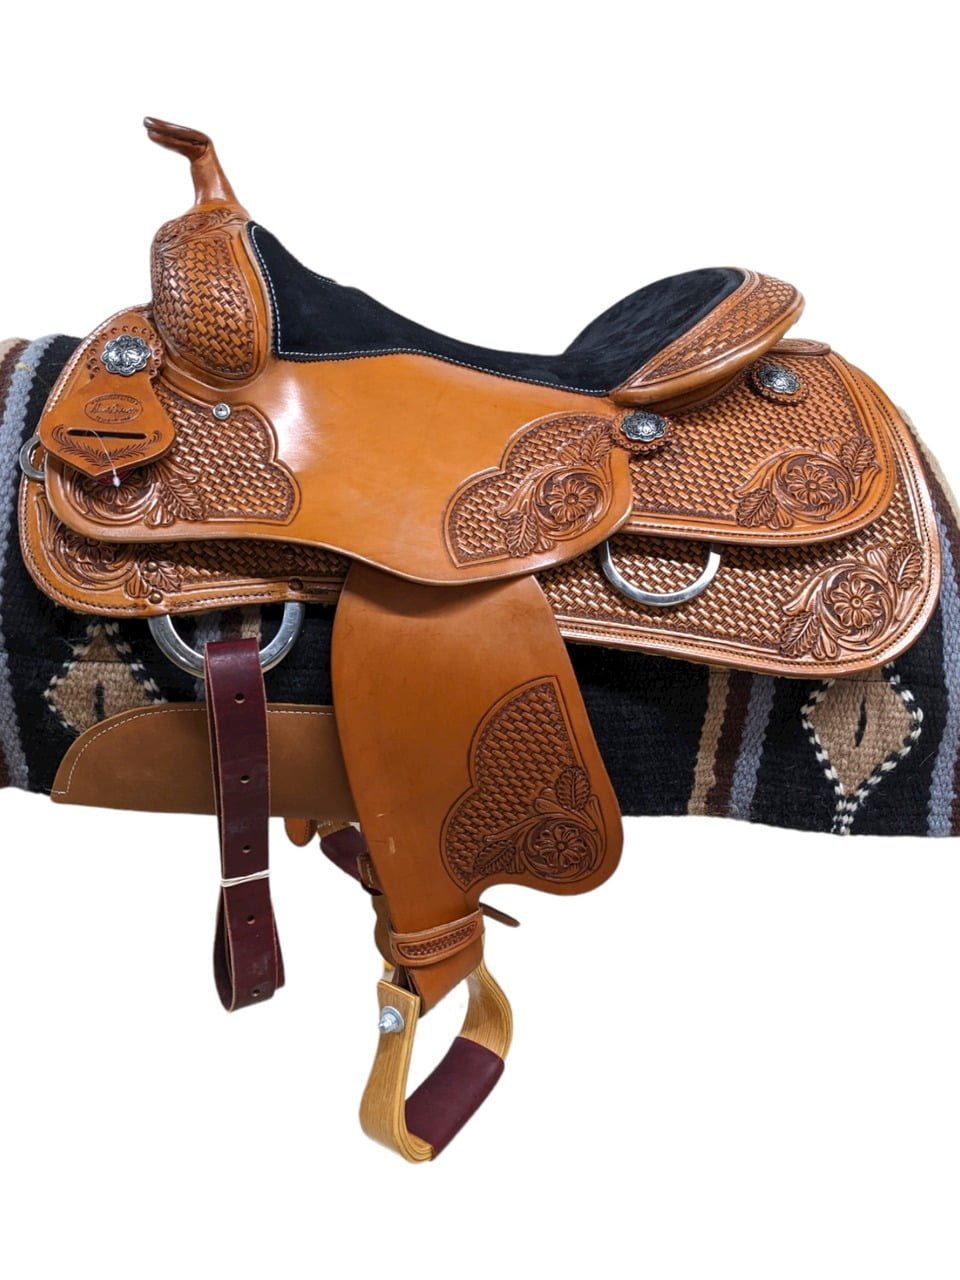 Behold this striking HR Saddlery Reiner! The light chestnut leather is embellished with a captivating blend of basket stamp and floral tooling. The black, cushioned seat ensures day-long comfort in the arena. With its enduring design, this saddle promises countless years of exceptional rides.